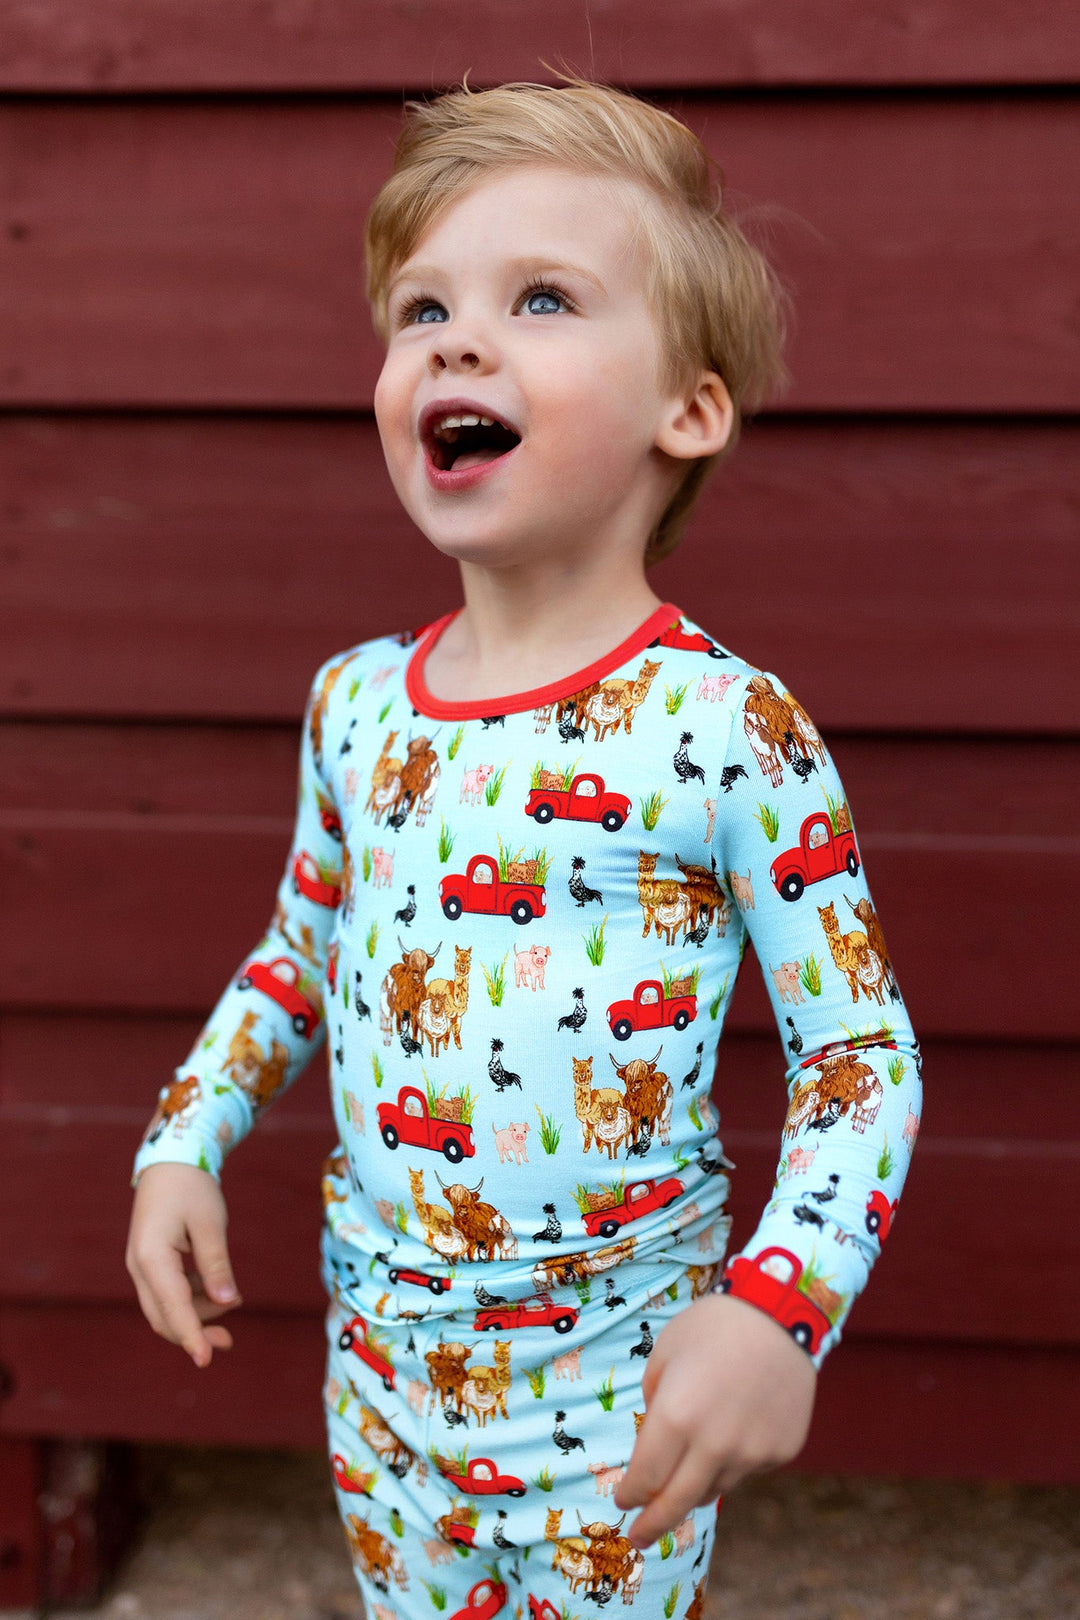 Best Pajamas for Both Boys and Girls - Vroom to the Planets – Free Birdees